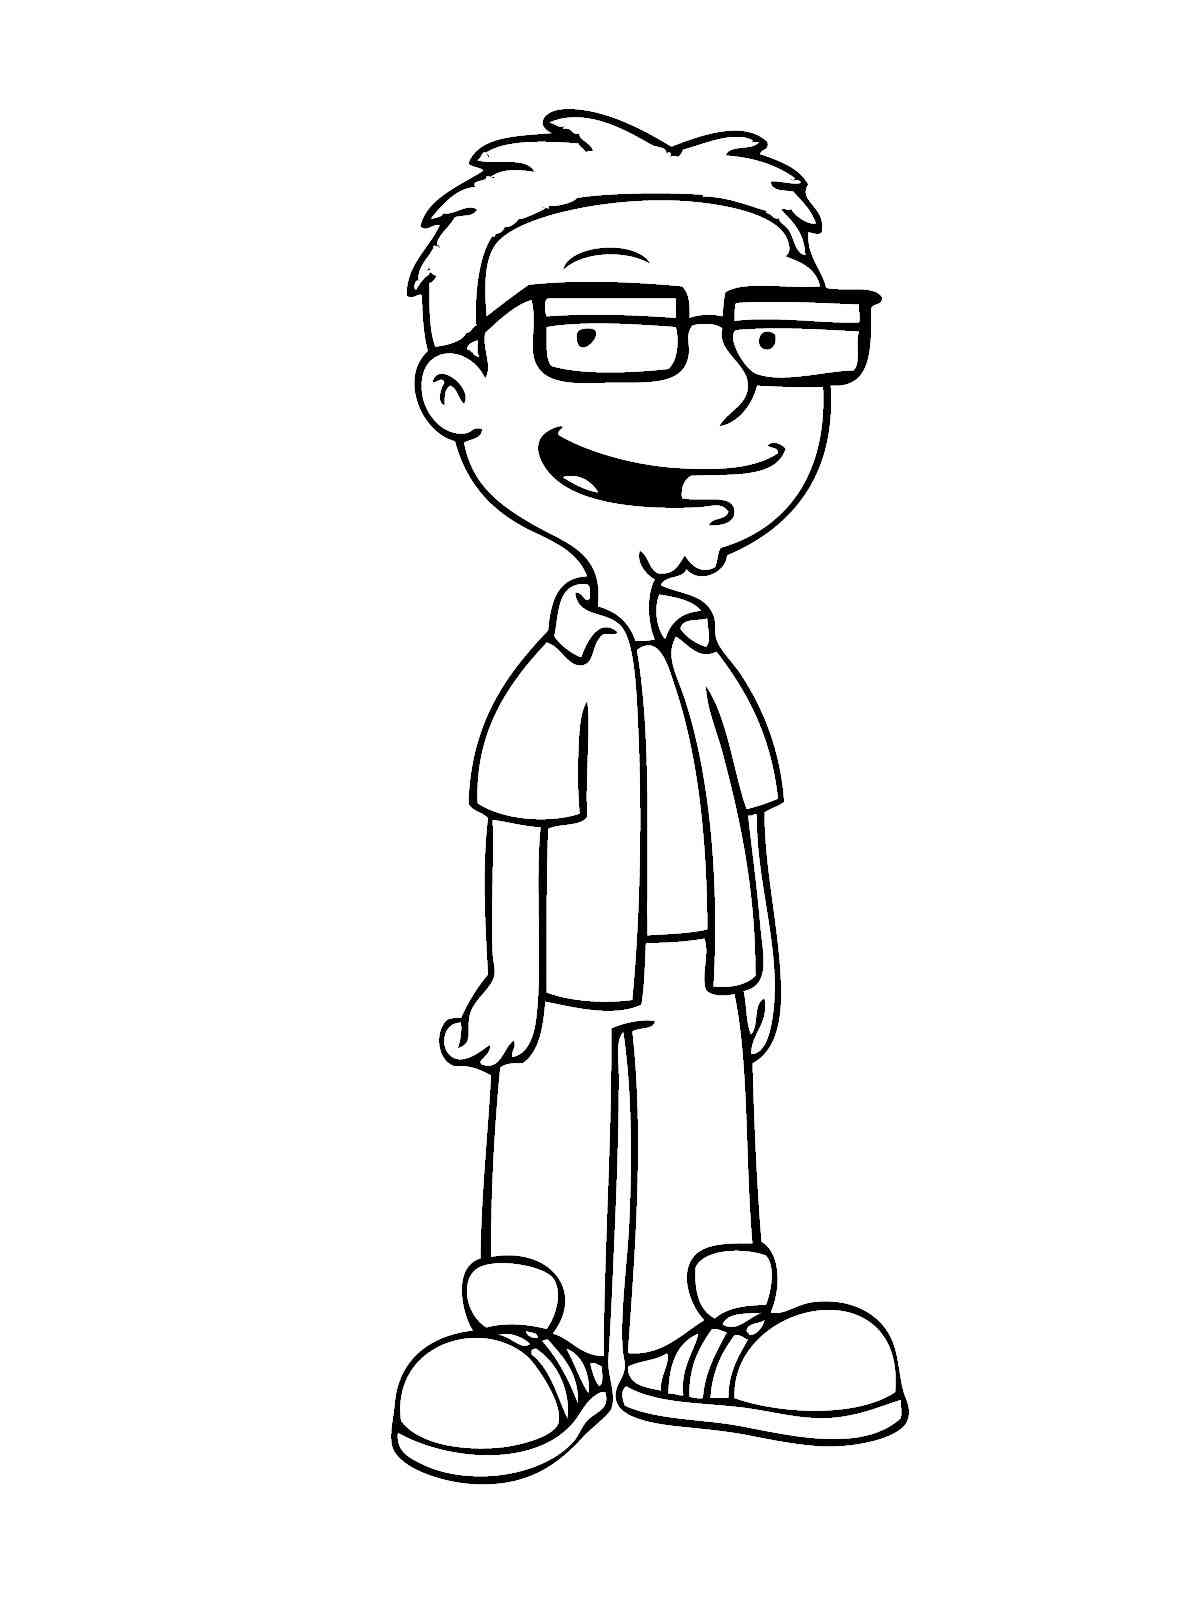 Steve Smith coloring page